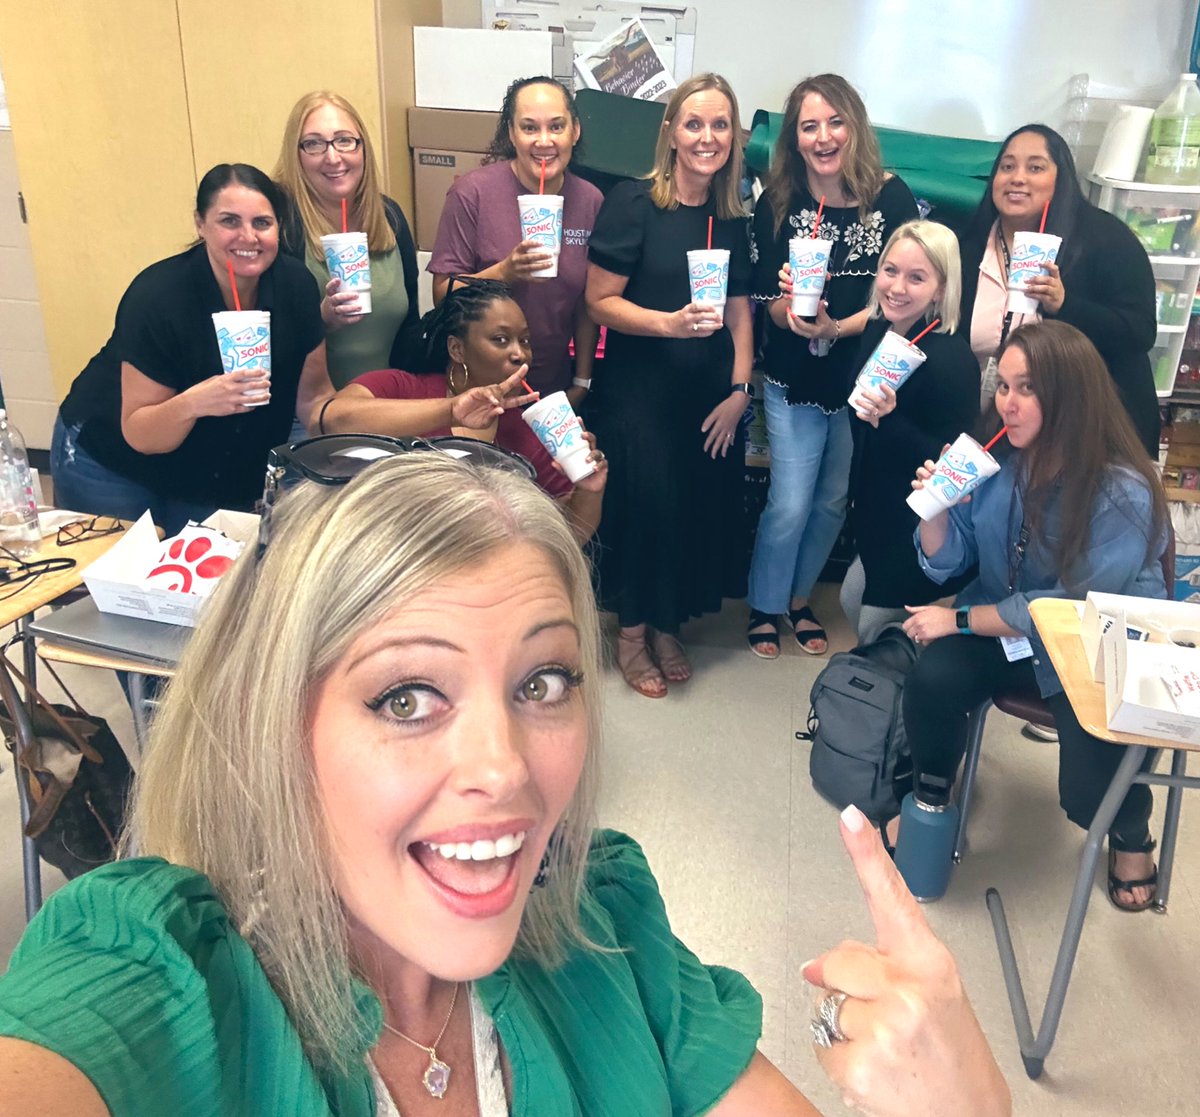 Thanks to @sonicdrivein we were “SIPPIN” while “CIP-ING” with my hardworking @WeAreGRHS Campus Improvement Team! Thanks for giving us some summer! #WeAreGR @carrieyanta @msbyarsculinary @MsTorresGRHS @RodriguezRhonda @RachelGuid @Queen_Coy @WykeGRHS @Joia_EmeryGRHS @GRHS_Eheman